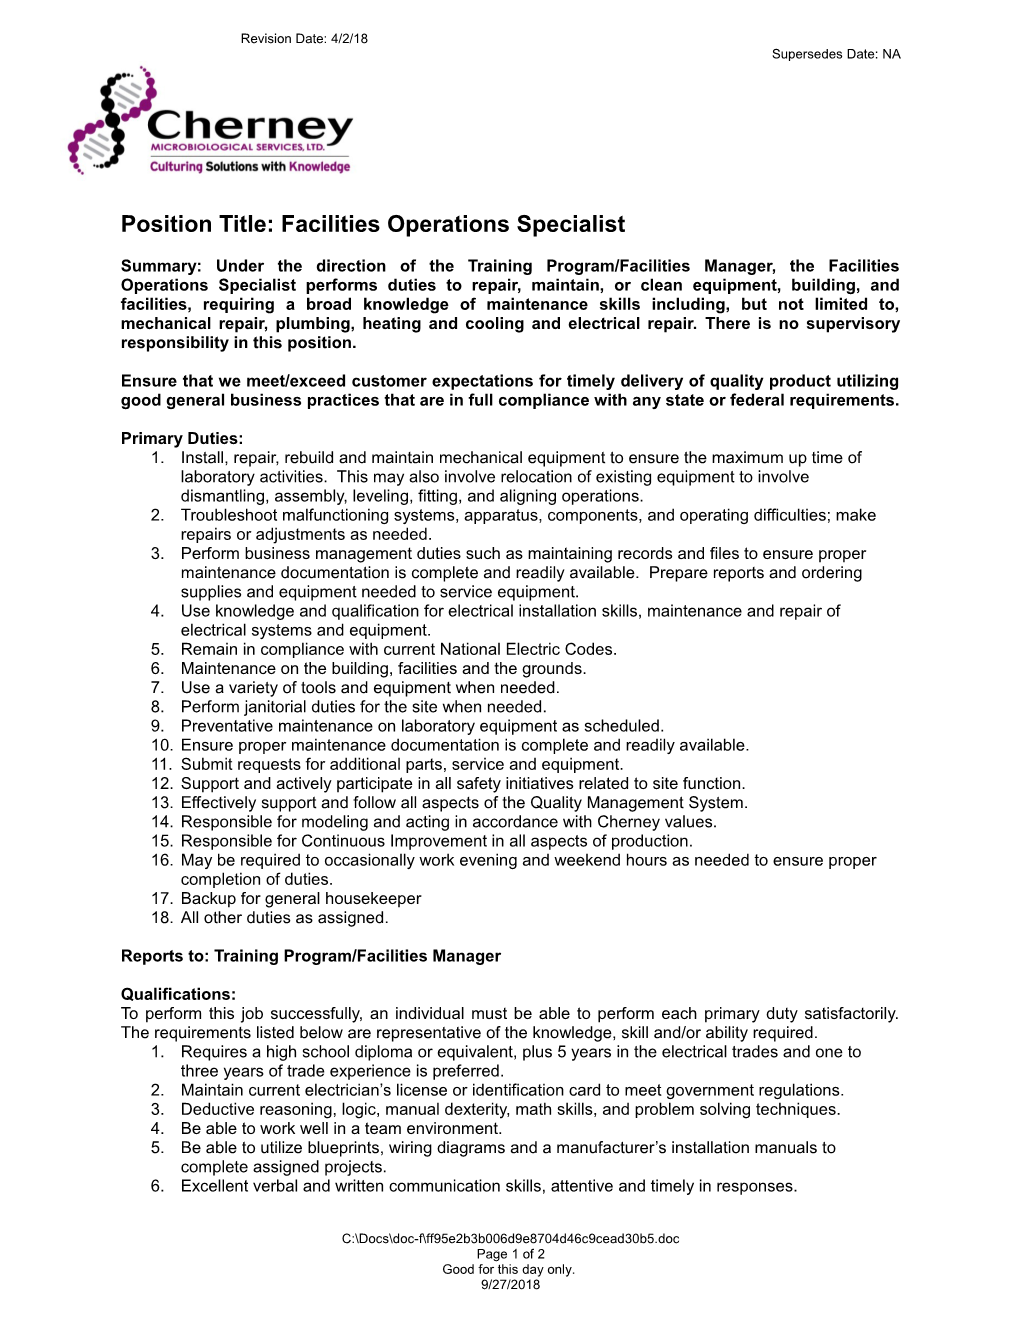 Position Title:Facilities Operations Specialist